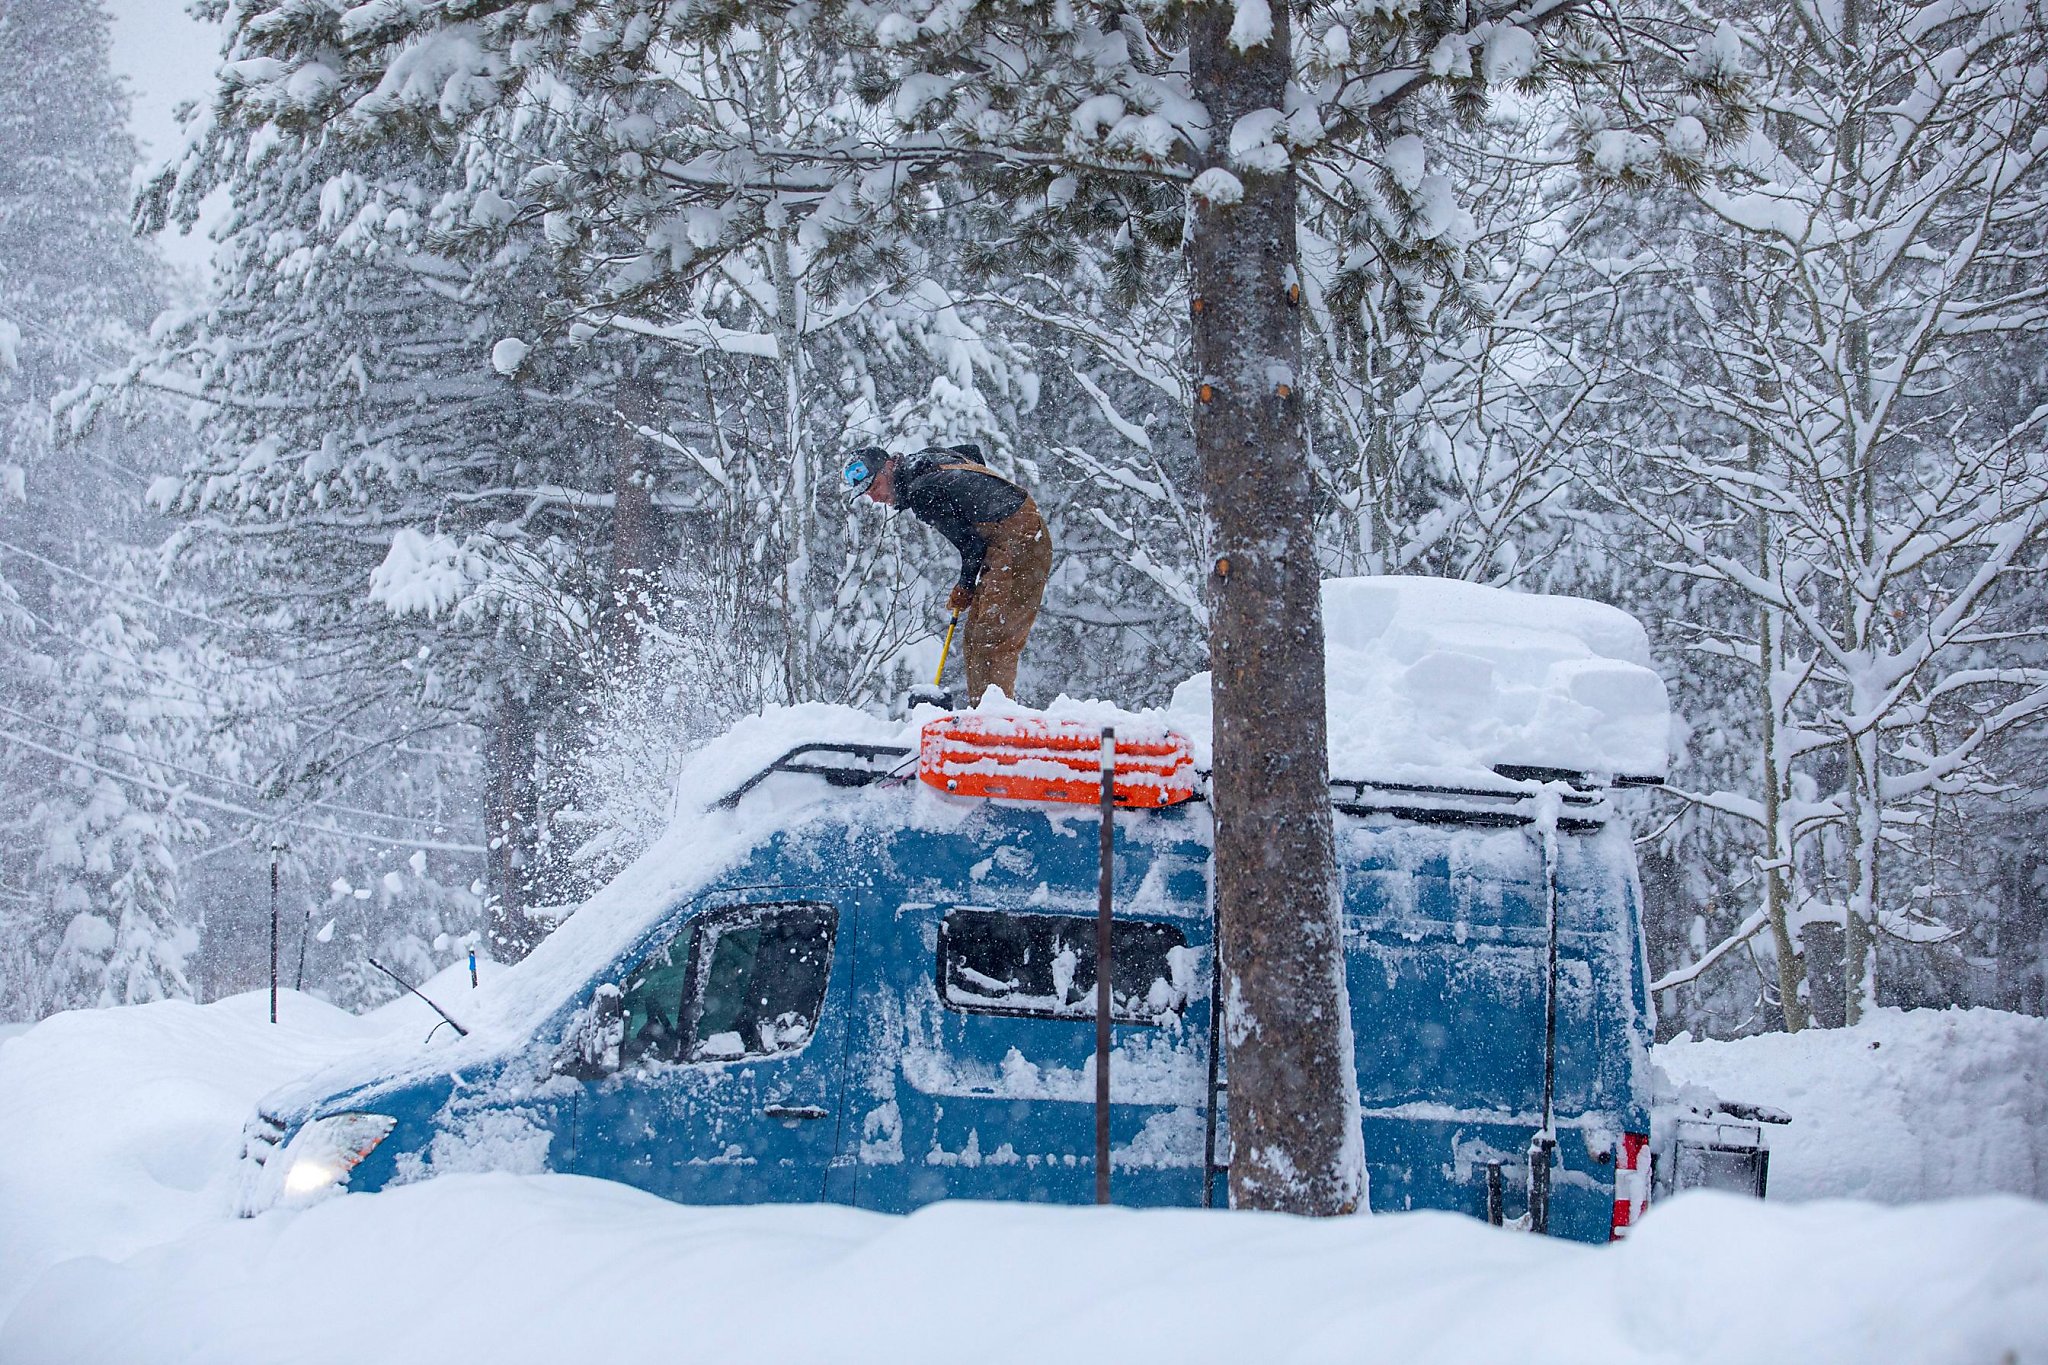 Snowshoeing, Snow camping and Snowstorms • Snowshoe Magazine